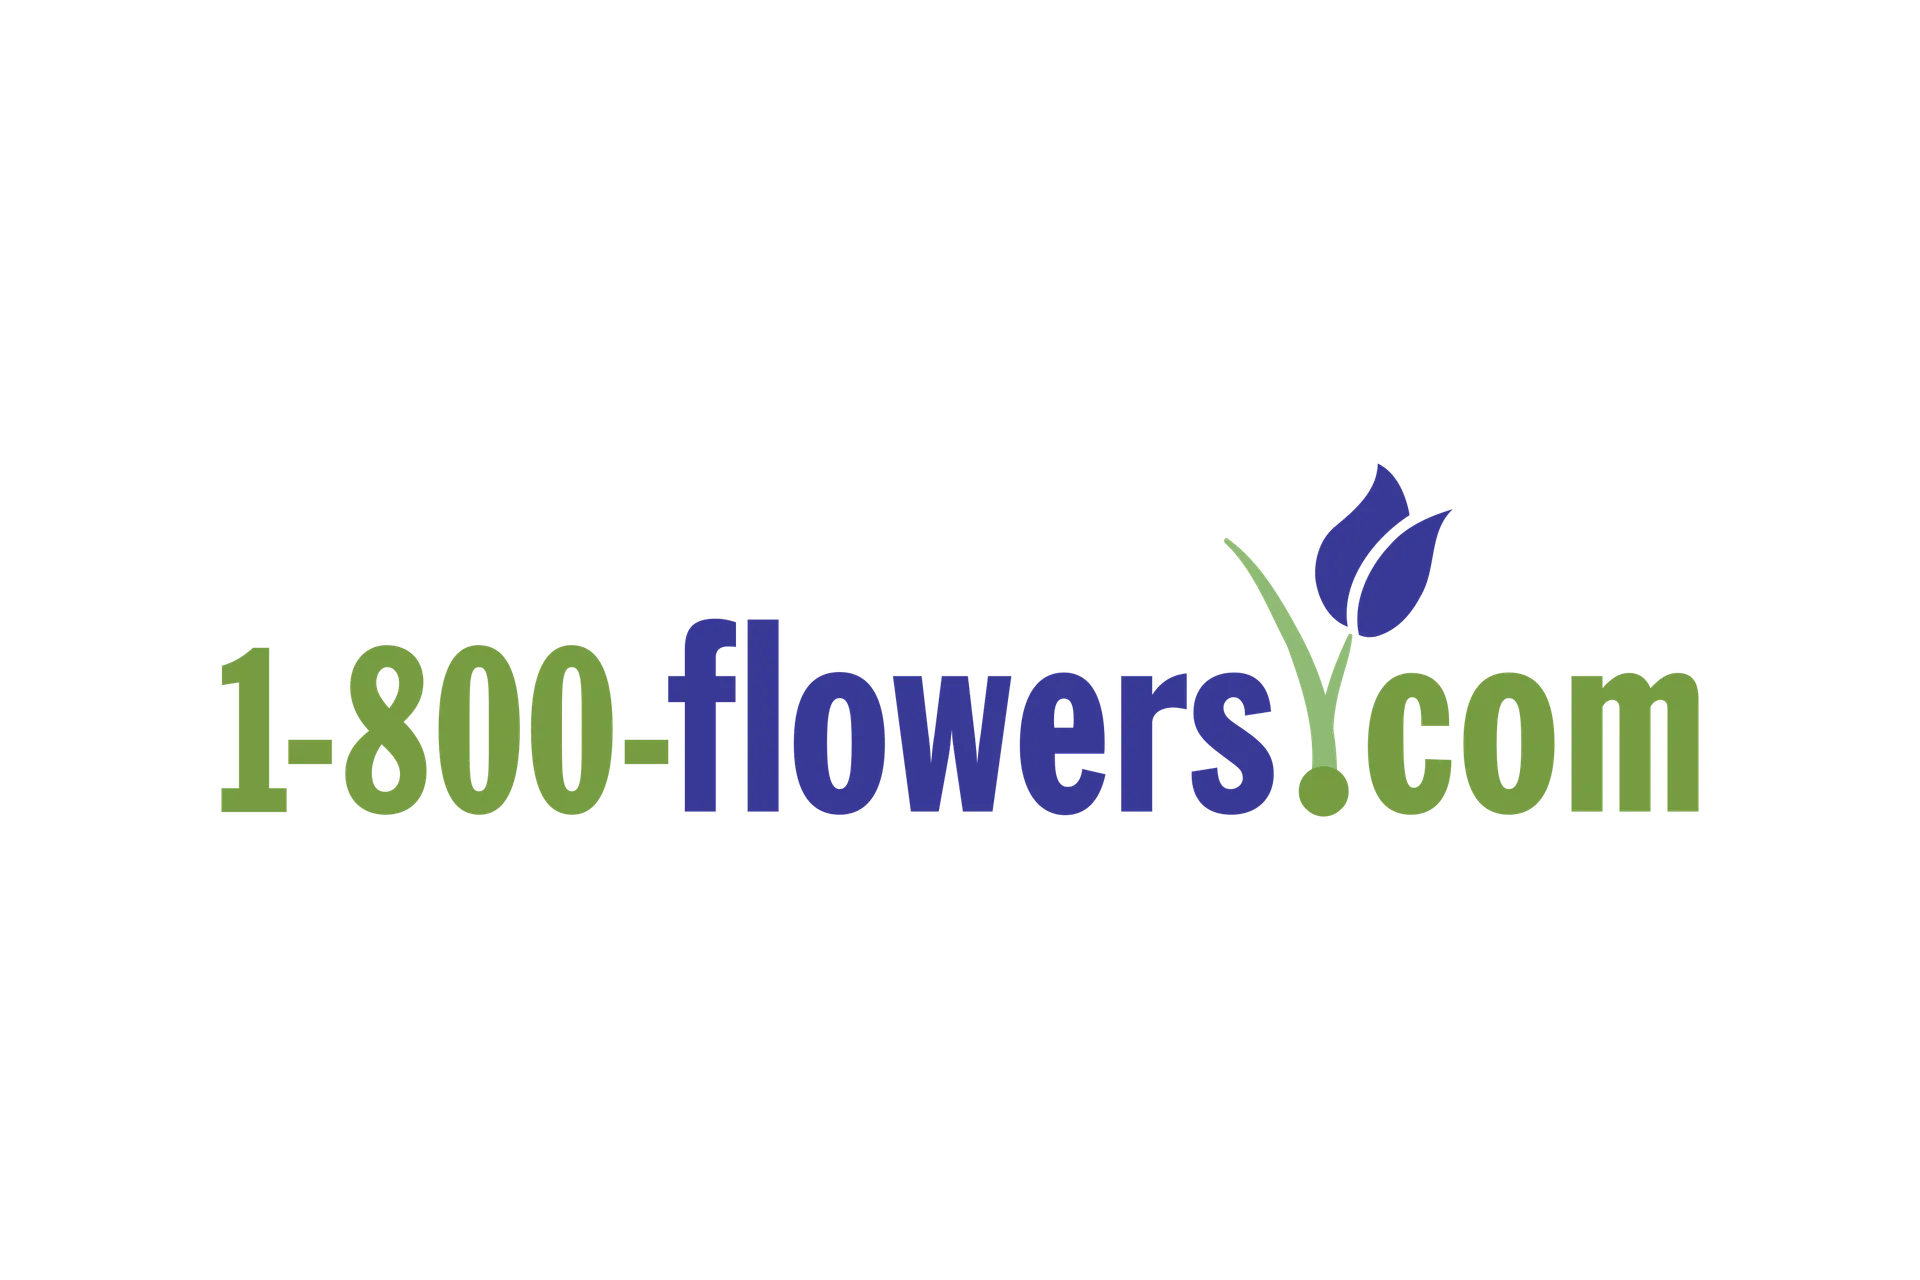 1-800 FLOWERS logo. Current weekly ad